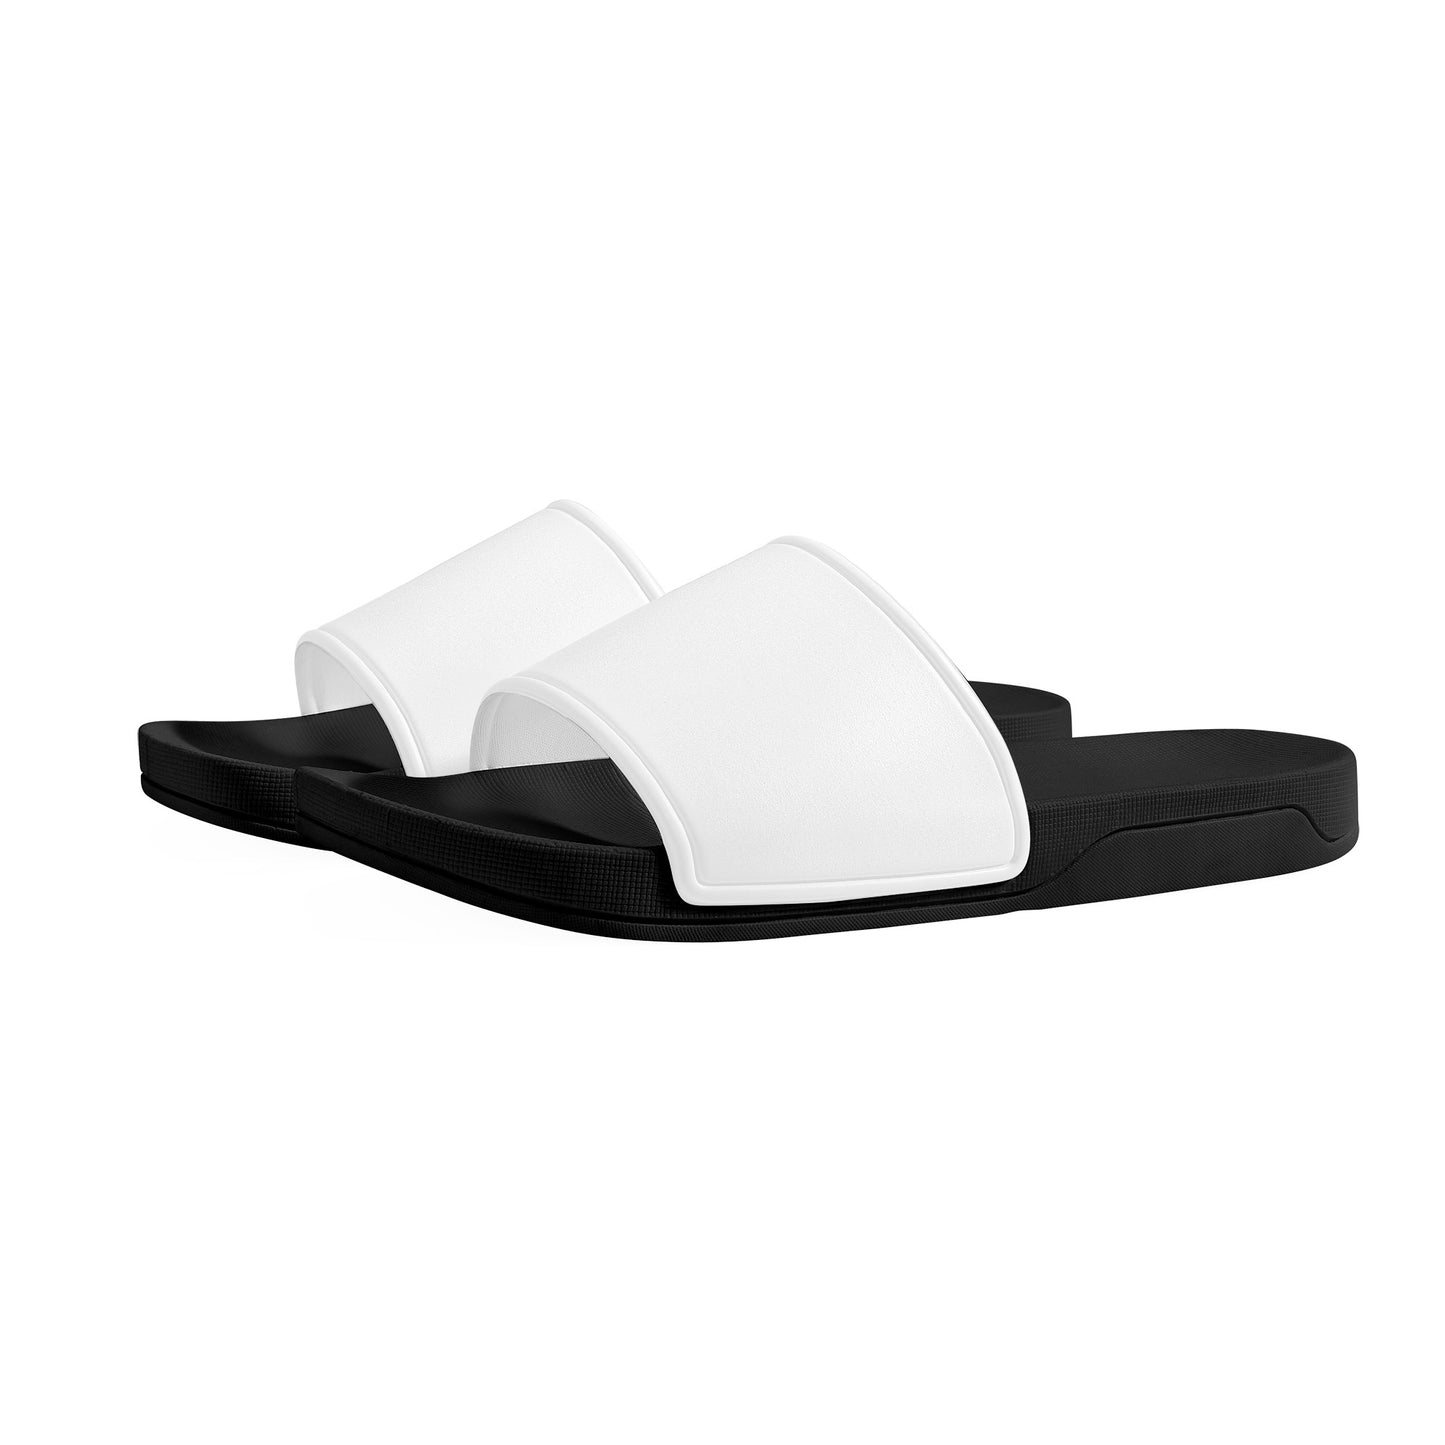 Create Your Own Slide Sandals - Black - Adults and Kids Sizes